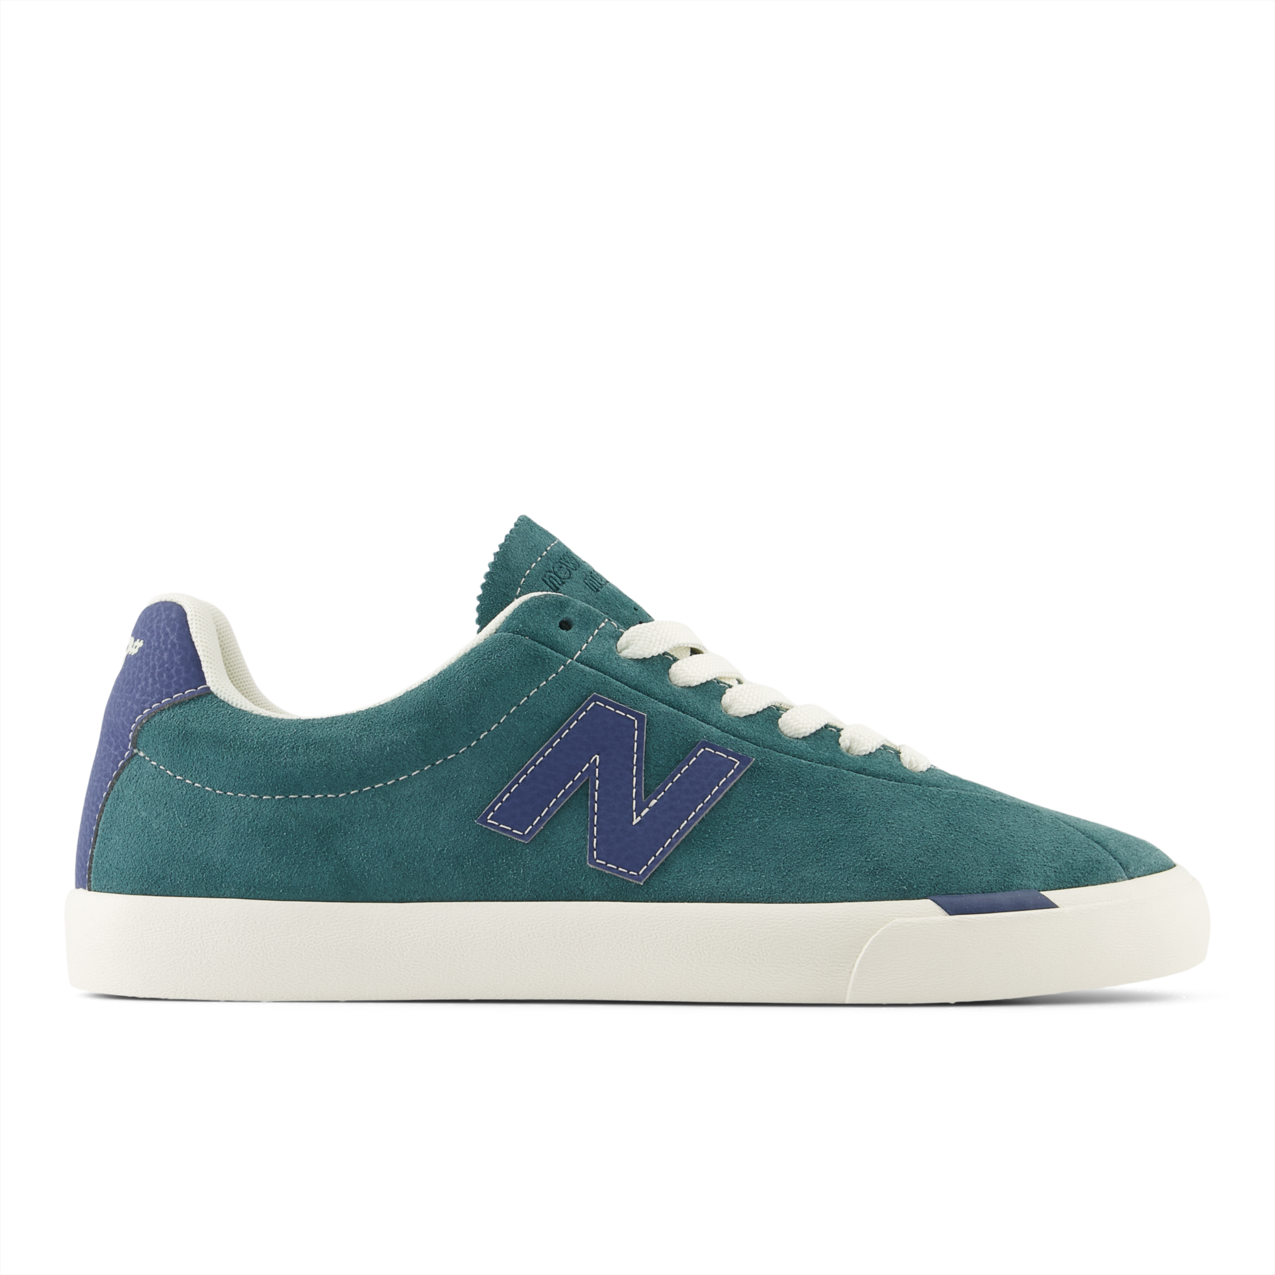 New Balance Numeric Men's 22 New Spruce Nb Navy Shoes